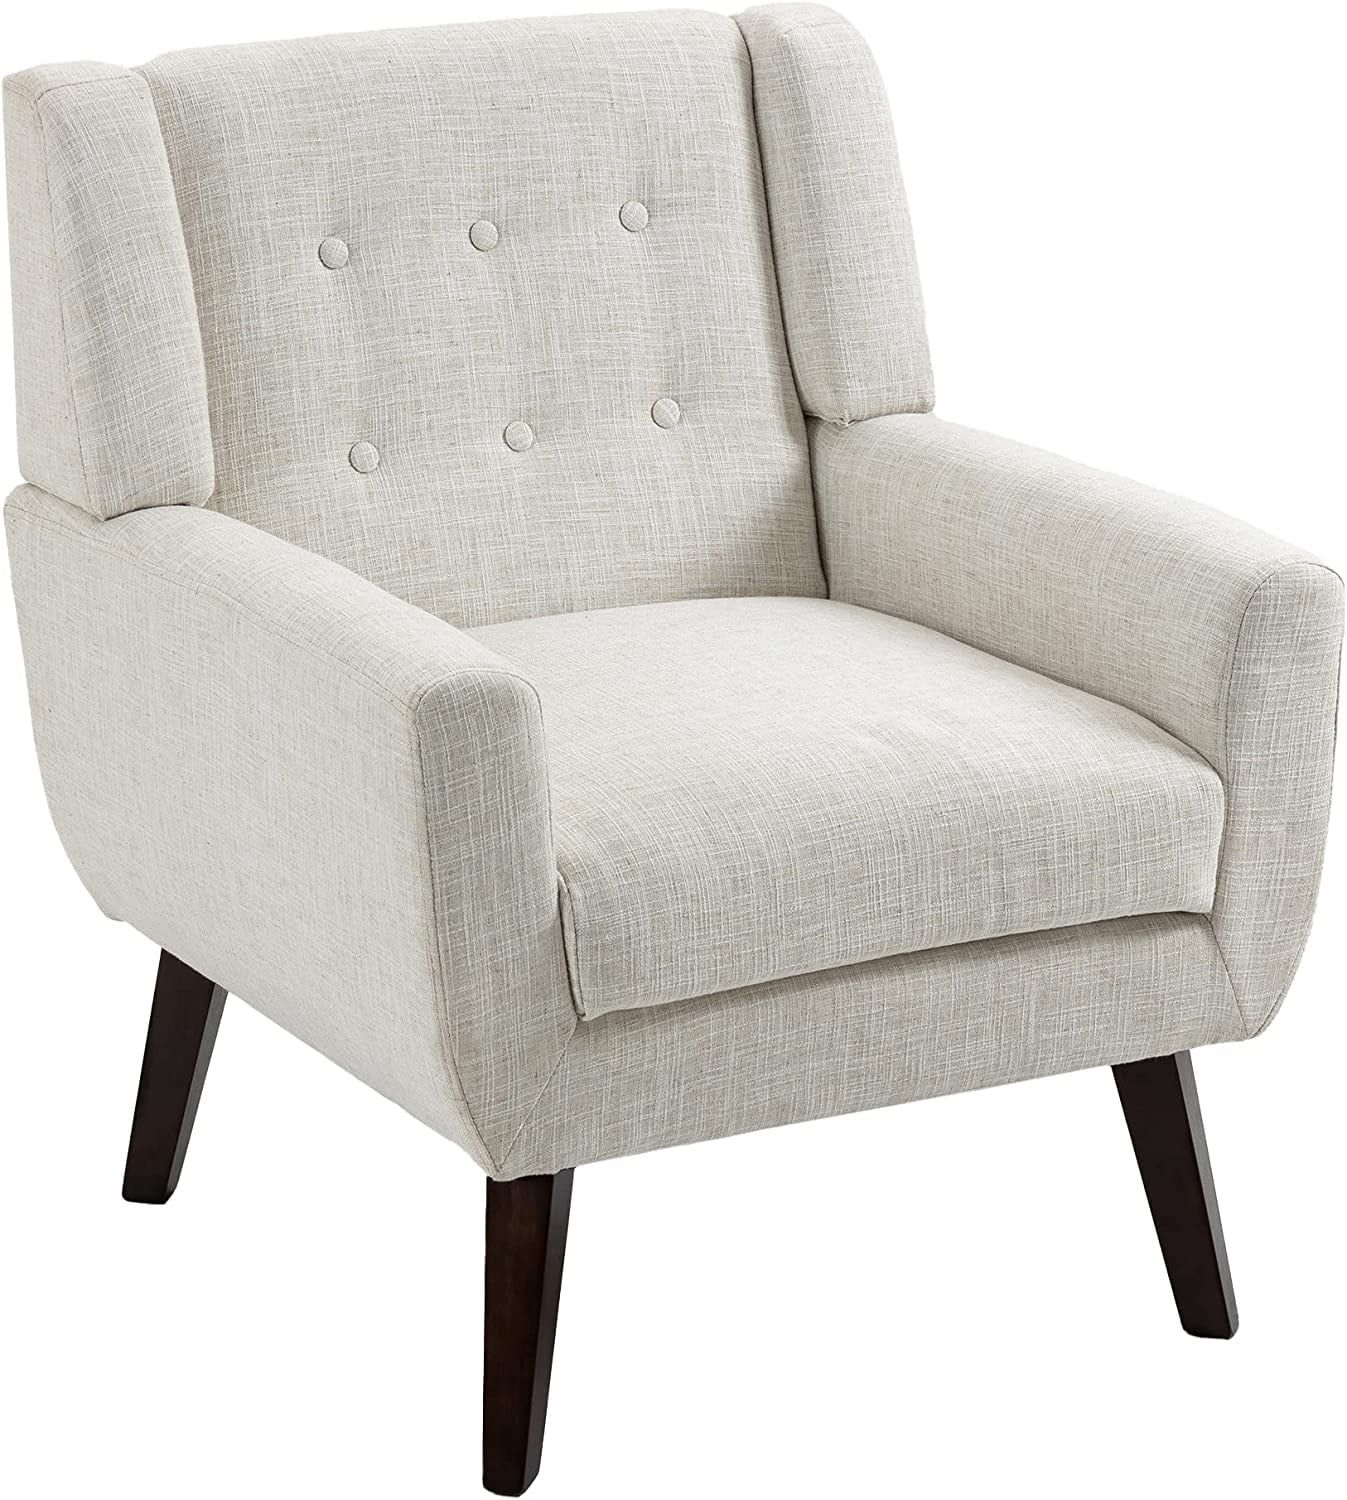 UIXE Beige Accent Chair, Linen Upholstered Armchair, Midcentury Modern Chair for Living Room, Bed... | Walmart (US)